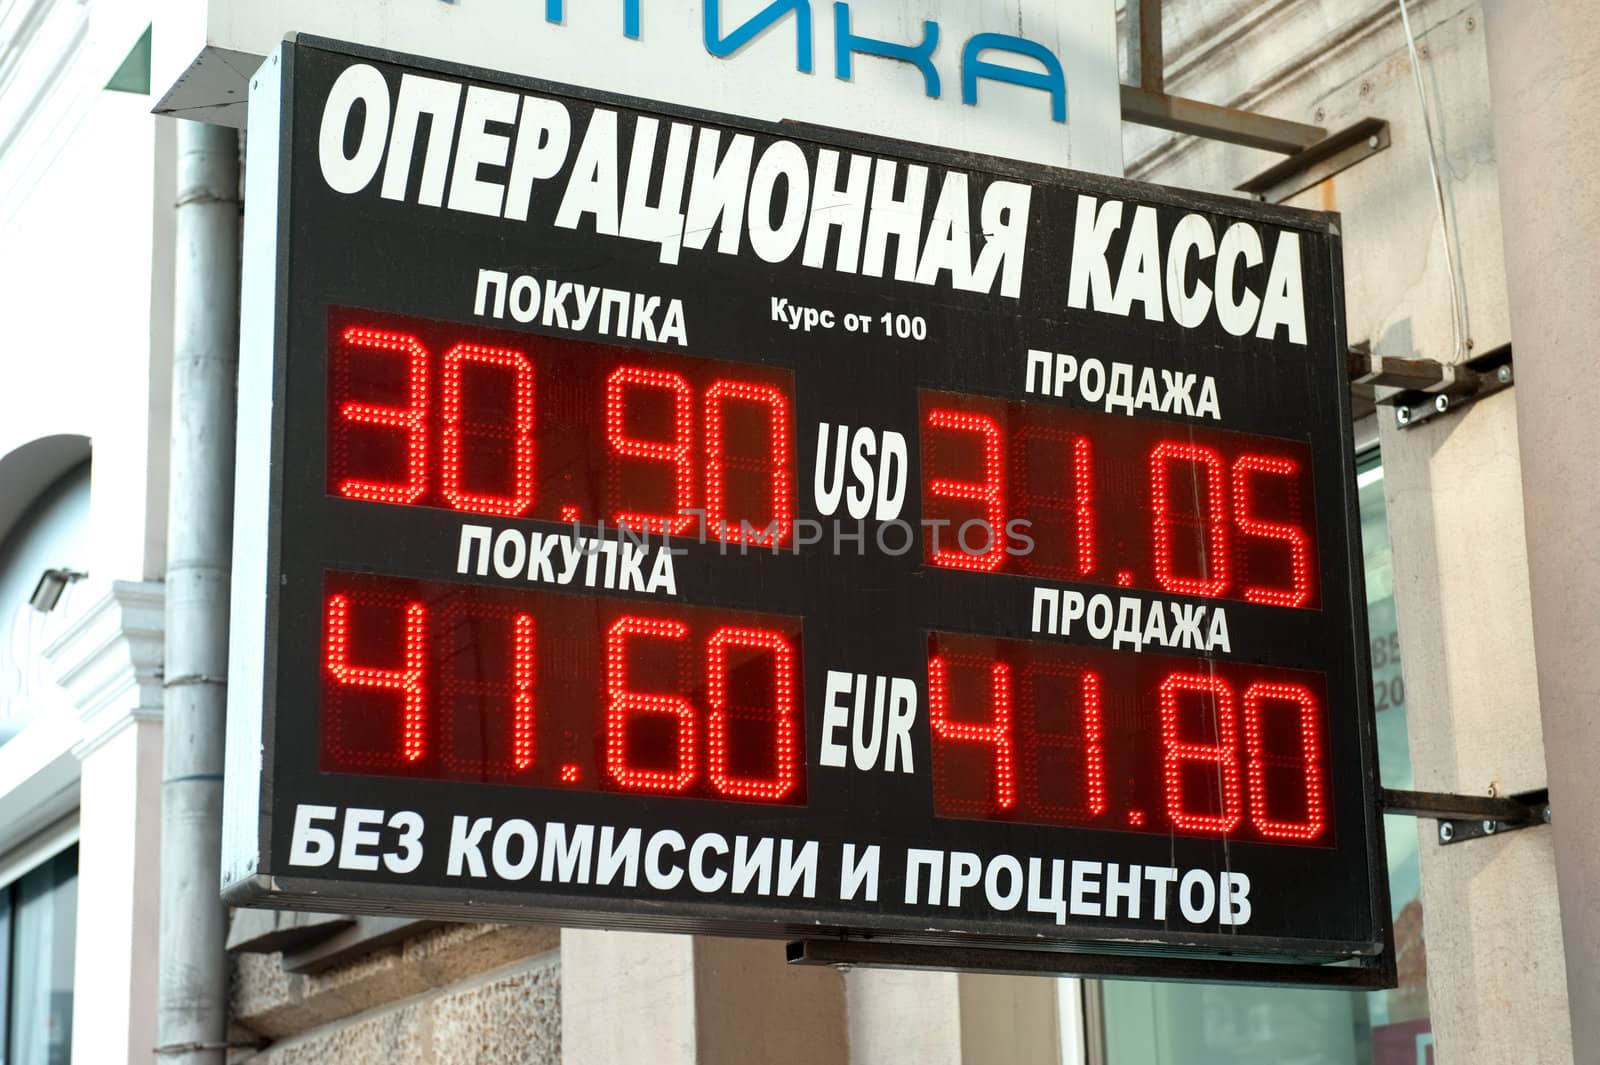 Tte display of money excange in Moscow, Russia, November 2011